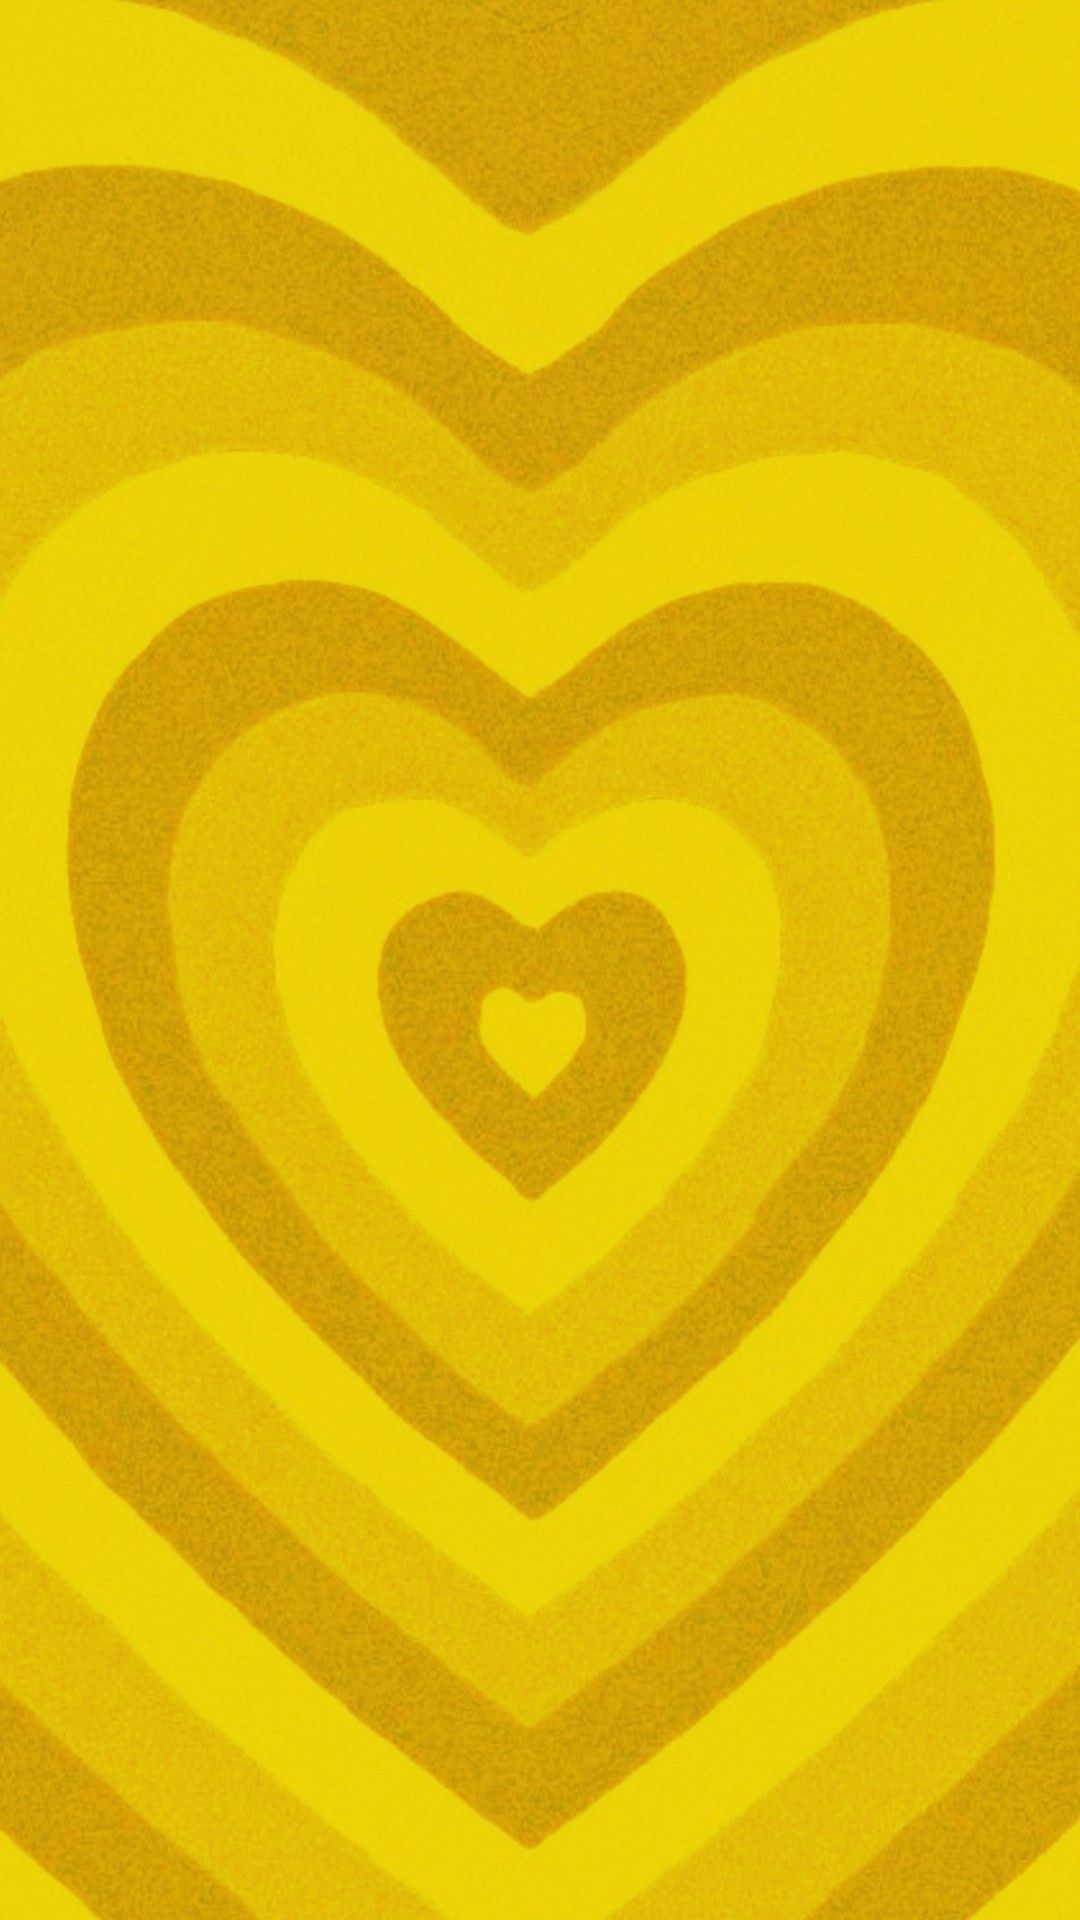 Pink and Yellow Heart Wallpaper Background